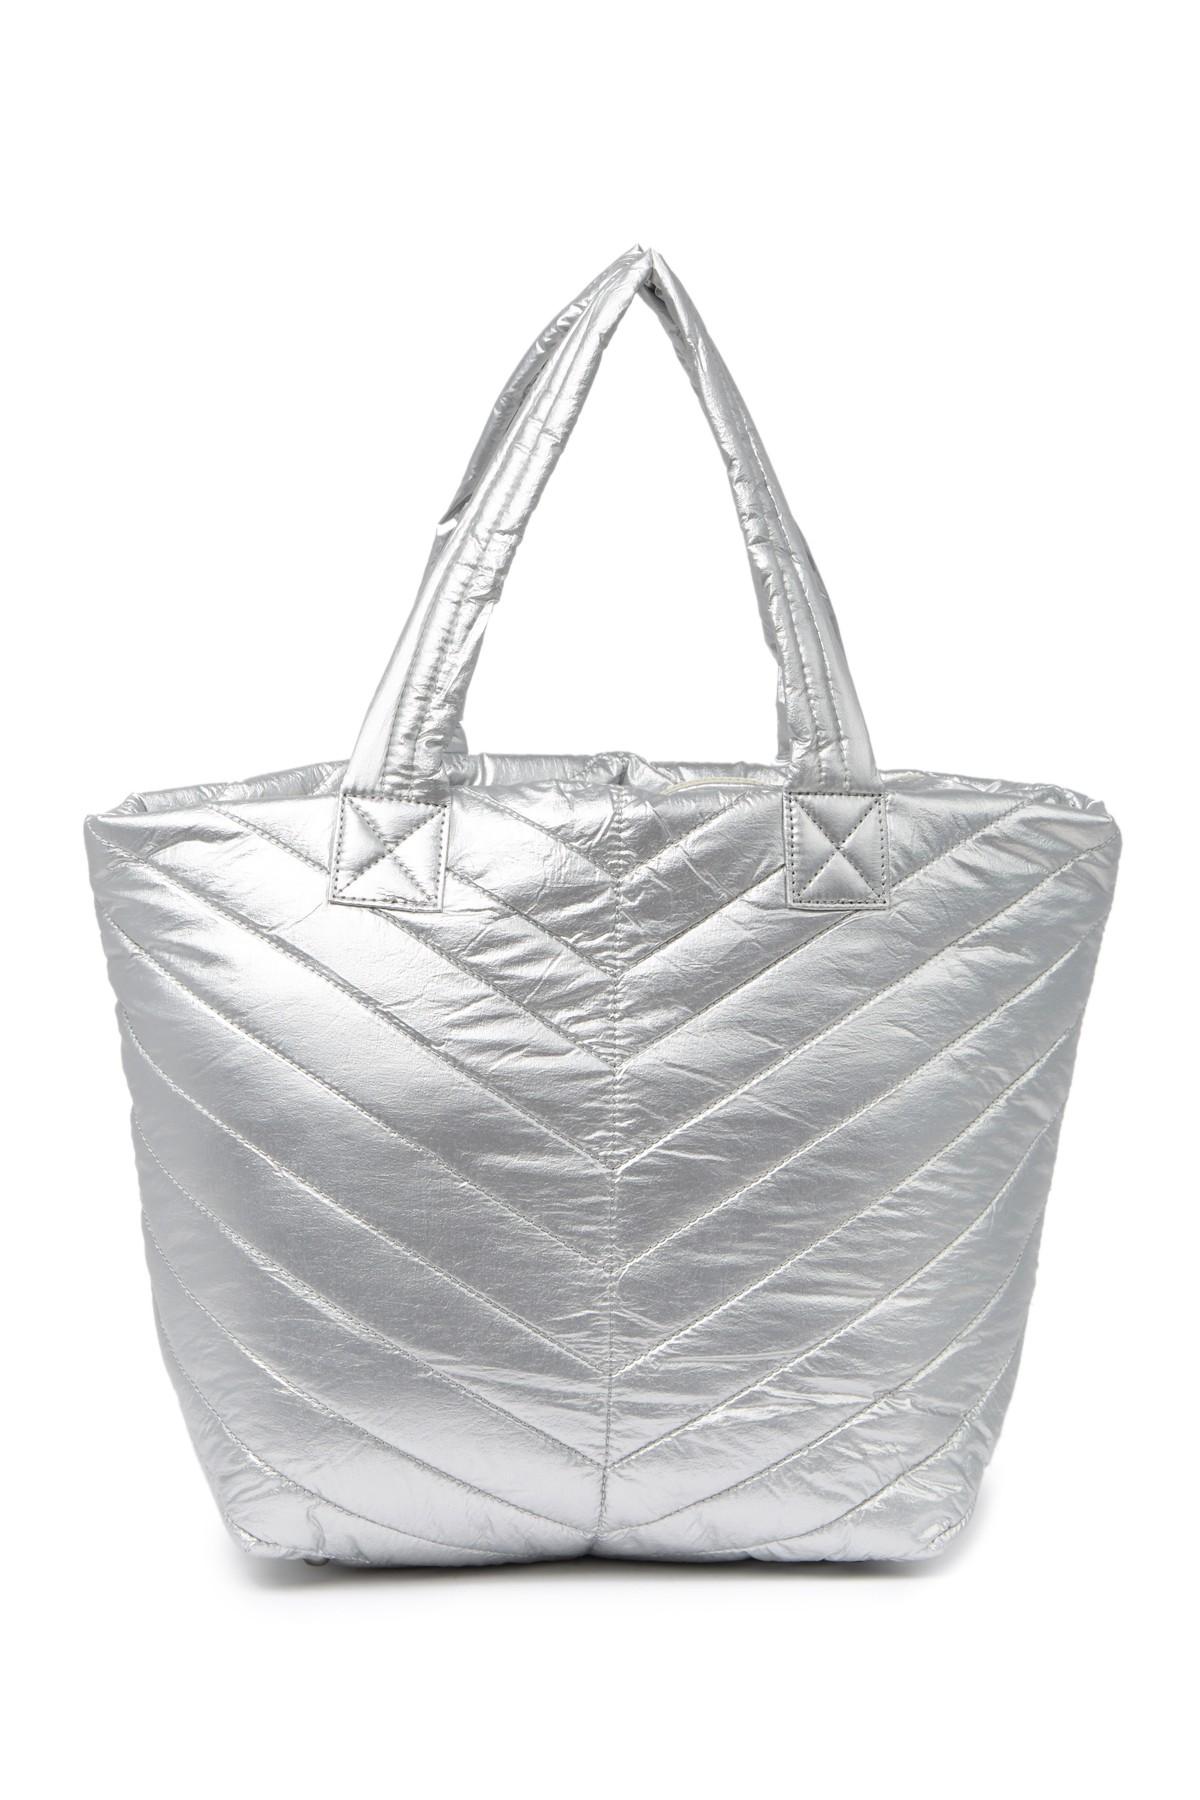 Urban Expressions Quilted Puffer Tote Bag in Metallic